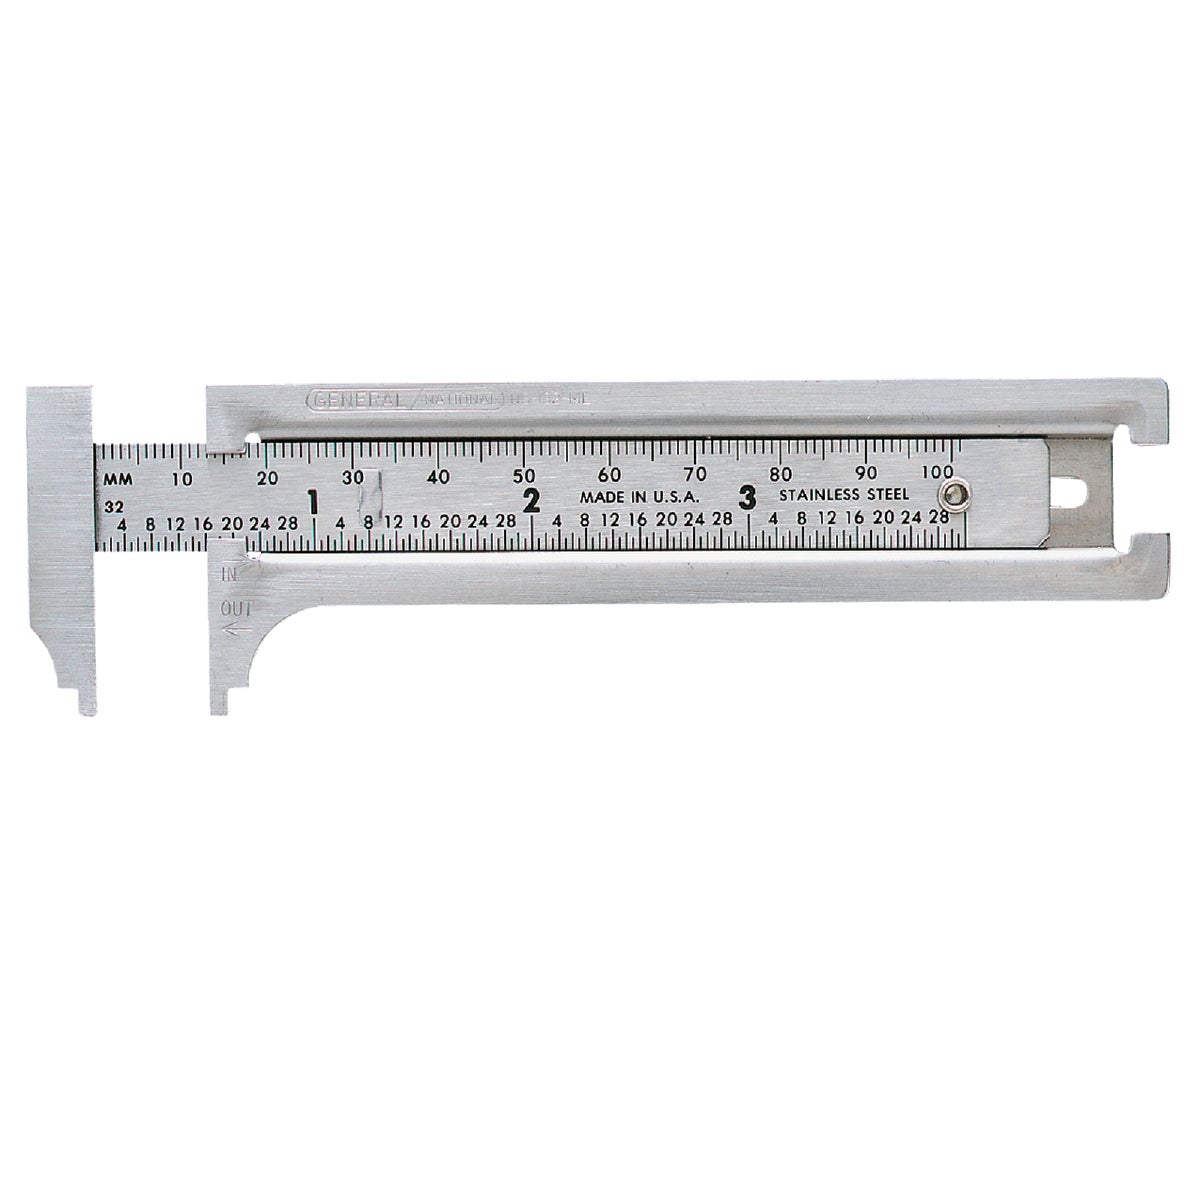 Item 339958, Stainless steel with inside/outside reading, metric and inch graduations: 1